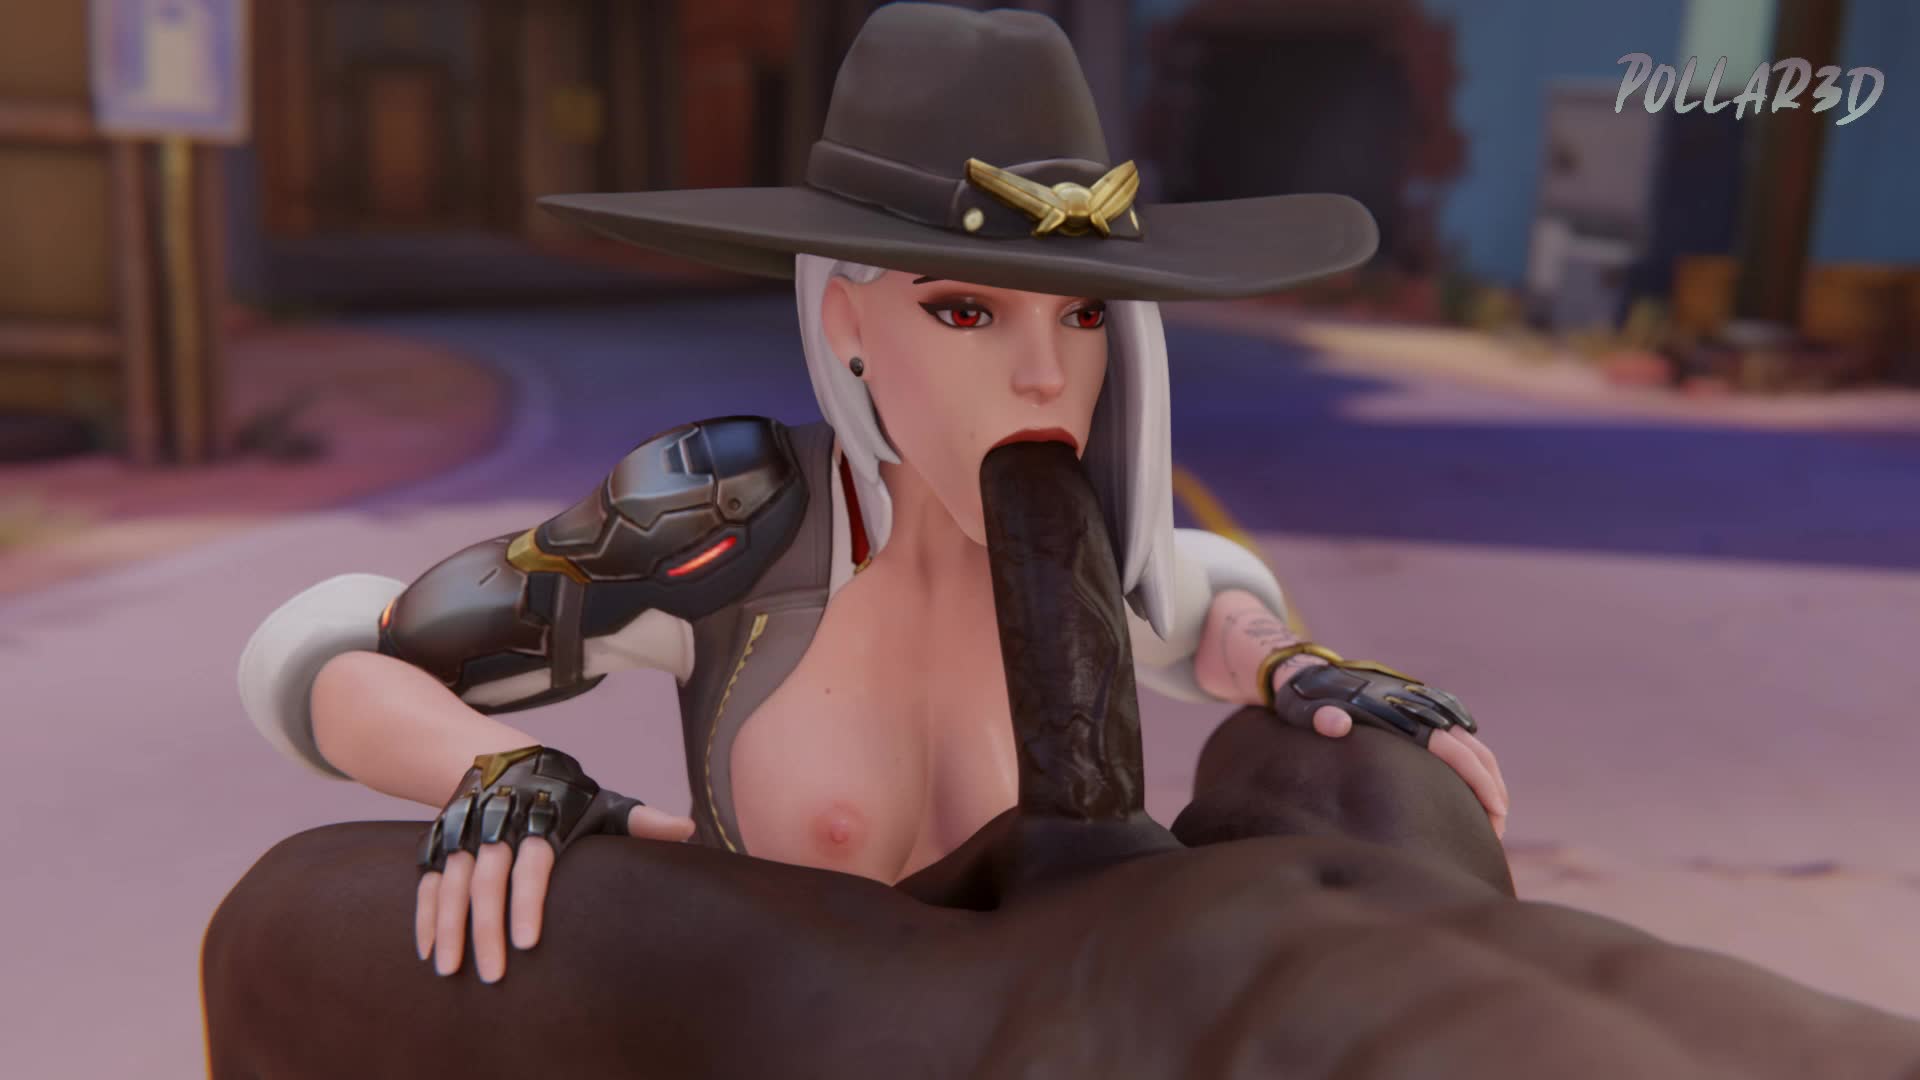 Ashe giving blowjob to a blackman – Overwatch NSFW animation thumbnail